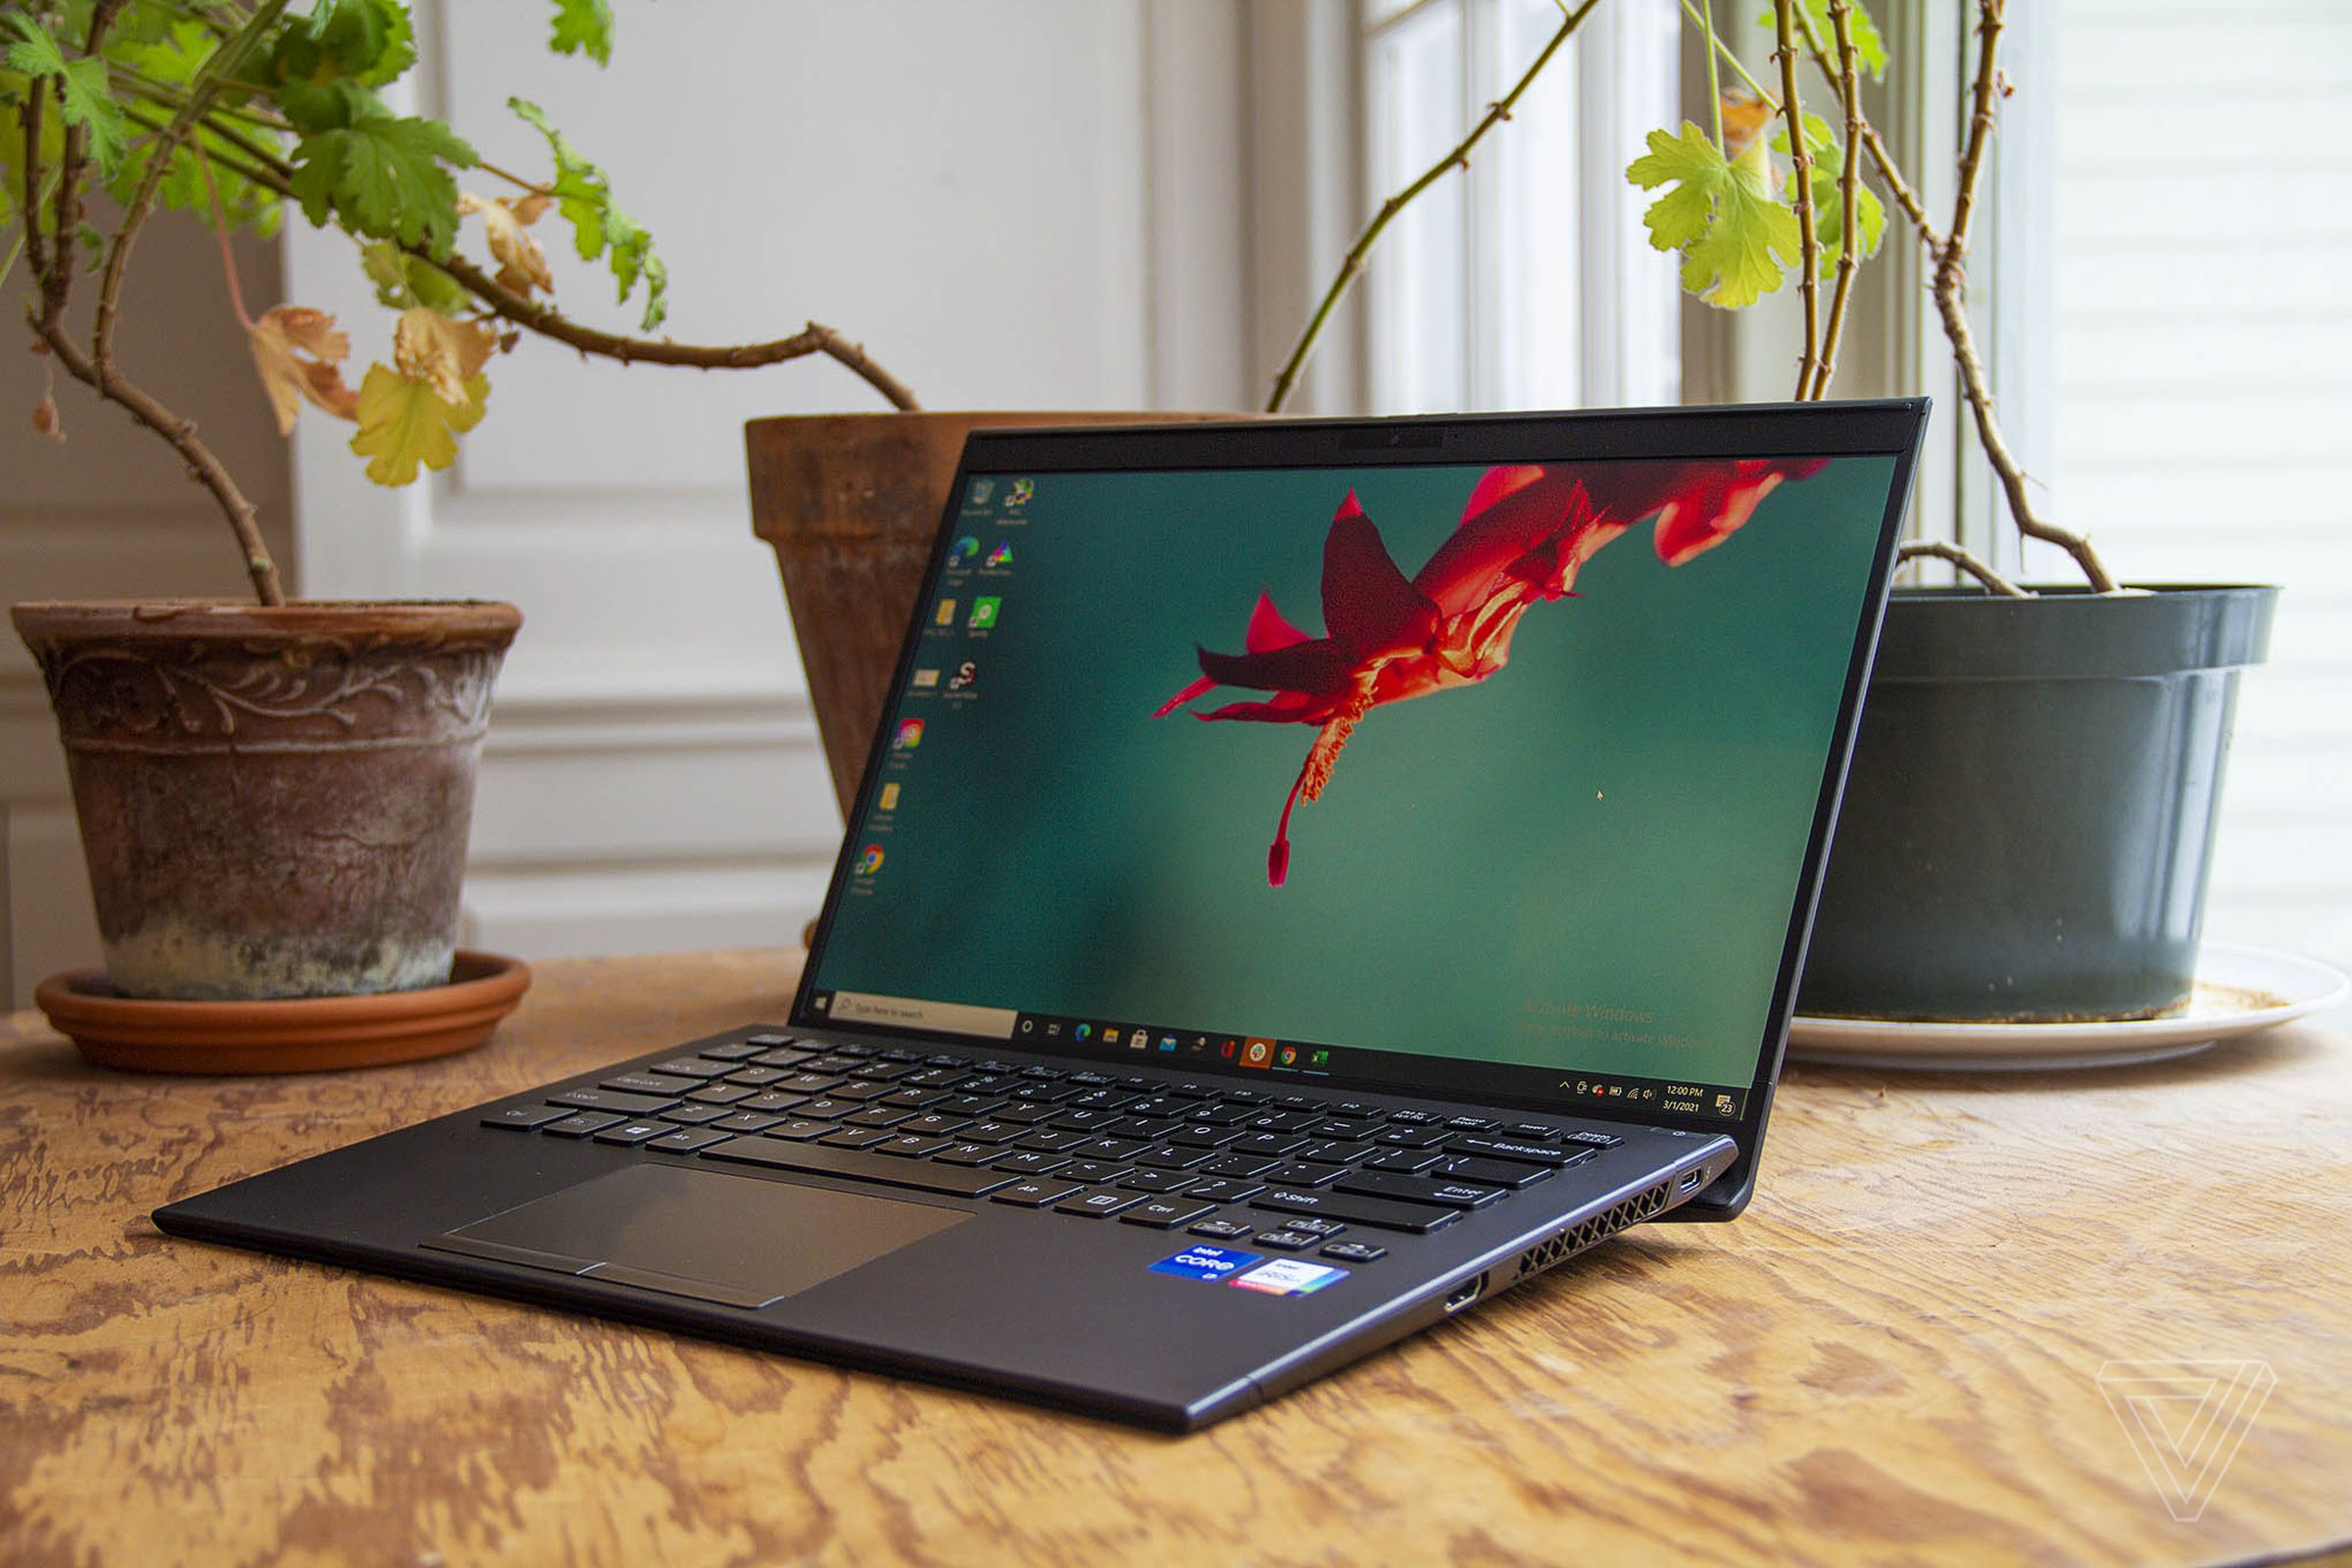 The Vaio Z on a table with three potted plants in the background, open and angled to the left. The screen displays a red flower on a blue background.